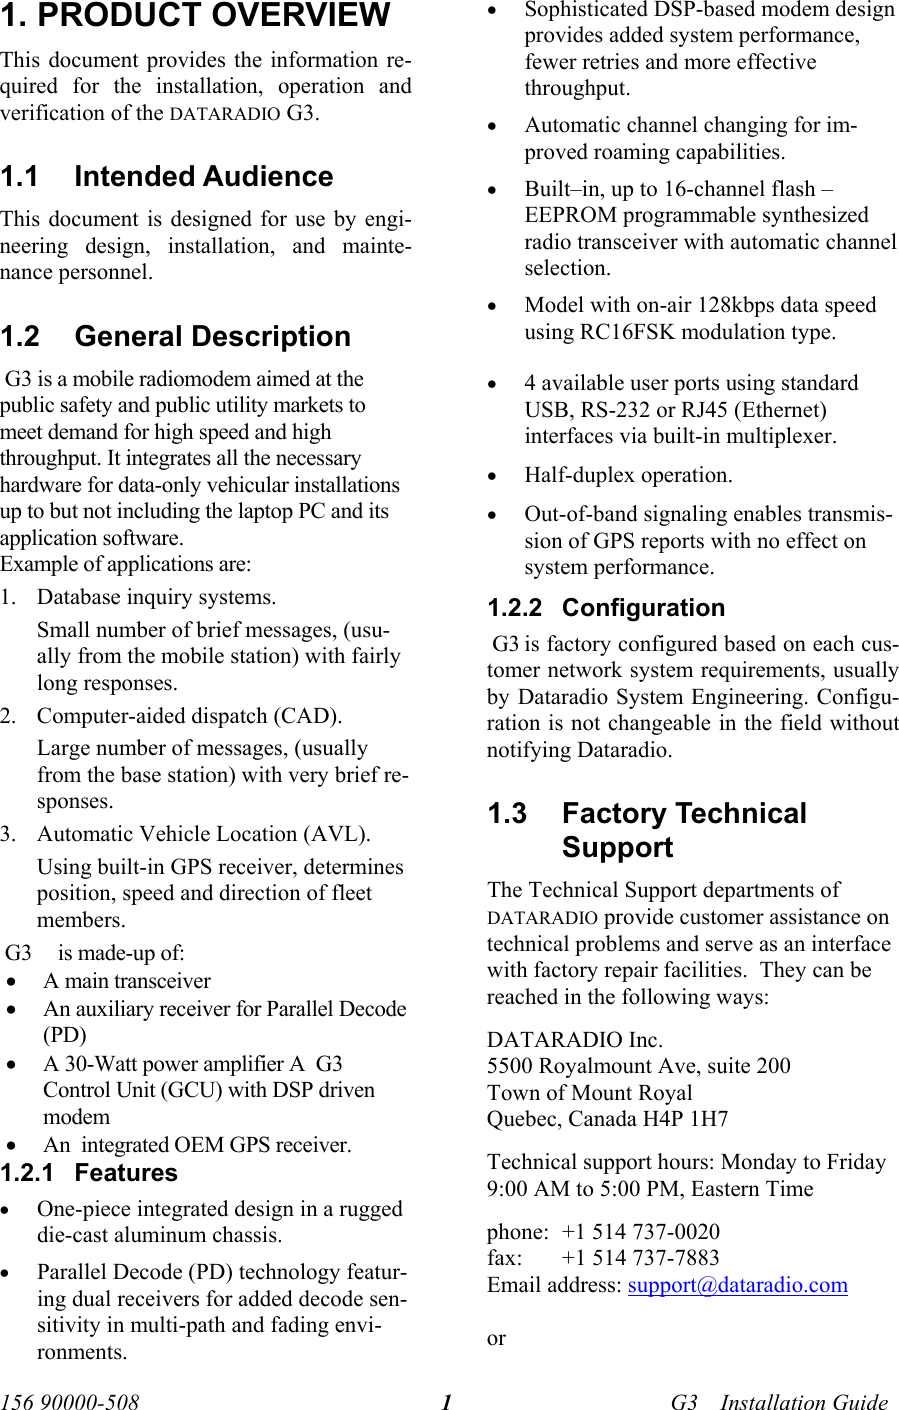   156 90000-508    G3     Installation Guide  11. PRODUCT OVERVIEW This document provides the information re-quired for the installation, operation and verification of the DATARADIO G3.  1.1 Intended Audience This document is designed for use by engi-neering design, installation, and mainte-nance personnel. 1.2 General Description  G3 is a mobile radiomodem aimed at the public safety and public utility markets to meet demand for high speed and high throughput. It integrates all the necessary hardware for data-only vehicular installations up to but not including the laptop PC and its application software.   Example of applications are: 1. Database inquiry systems.  Small number of brief messages, (usu-ally from the mobile station) with fairly long responses. 2. Computer-aided dispatch (CAD). Large number of messages, (usually from the base station) with very brief re-sponses. 3. Automatic Vehicle Location (AVL). Using built-in GPS receiver, determines position, speed and direction of fleet members.  G3      is made-up of: • A main transceiver  • An auxiliary receiver for Parallel Decode (PD)  • A 30-Watt power amplifier A  G3 Control Unit (GCU) with DSP driven modem  • An  integrated OEM GPS receiver.  1.2.1 Features • One-piece integrated design in a rugged die-cast aluminum chassis. • Parallel Decode (PD) technology featur-ing dual receivers for added decode sen-sitivity in multi-path and fading envi-ronments. • Sophisticated DSP-based modem design provides added system performance, fewer retries and more effective throughput. • Automatic channel changing for im-proved roaming capabilities. • Built–in, up to 16-channel flash –EEPROM programmable synthesized radio transceiver with automatic channel selection. • Model with on-air 128kbps data speed using RC16FSK modulation type.   • 4 available user ports using standard USB, RS-232 or RJ45 (Ethernet) interfaces via built-in multiplexer. • Half-duplex operation. • Out-of-band signaling enables transmis-sion of GPS reports with no effect on system performance. 1.2.2 Configuration  G3 is factory configured based on each cus-tomer network system requirements, usually by Dataradio System Engineering. Configu-ration is not changeable in the field without notifying Dataradio. 1.3 Factory Technical Support The Technical Support departments of DATARADIO provide customer assistance on technical problems and serve as an interface with factory repair facilities.  They can be reached in the following ways: DATARADIO Inc. 5500 Royalmount Ave, suite 200 Town of Mount Royal Quebec, Canada H4P 1H7 Technical support hours: Monday to Friday 9:00 AM to 5:00 PM, Eastern Time phone:  +1 514 737-0020 fax:  +1 514 737-7883  Email address: support@dataradio.com  or  